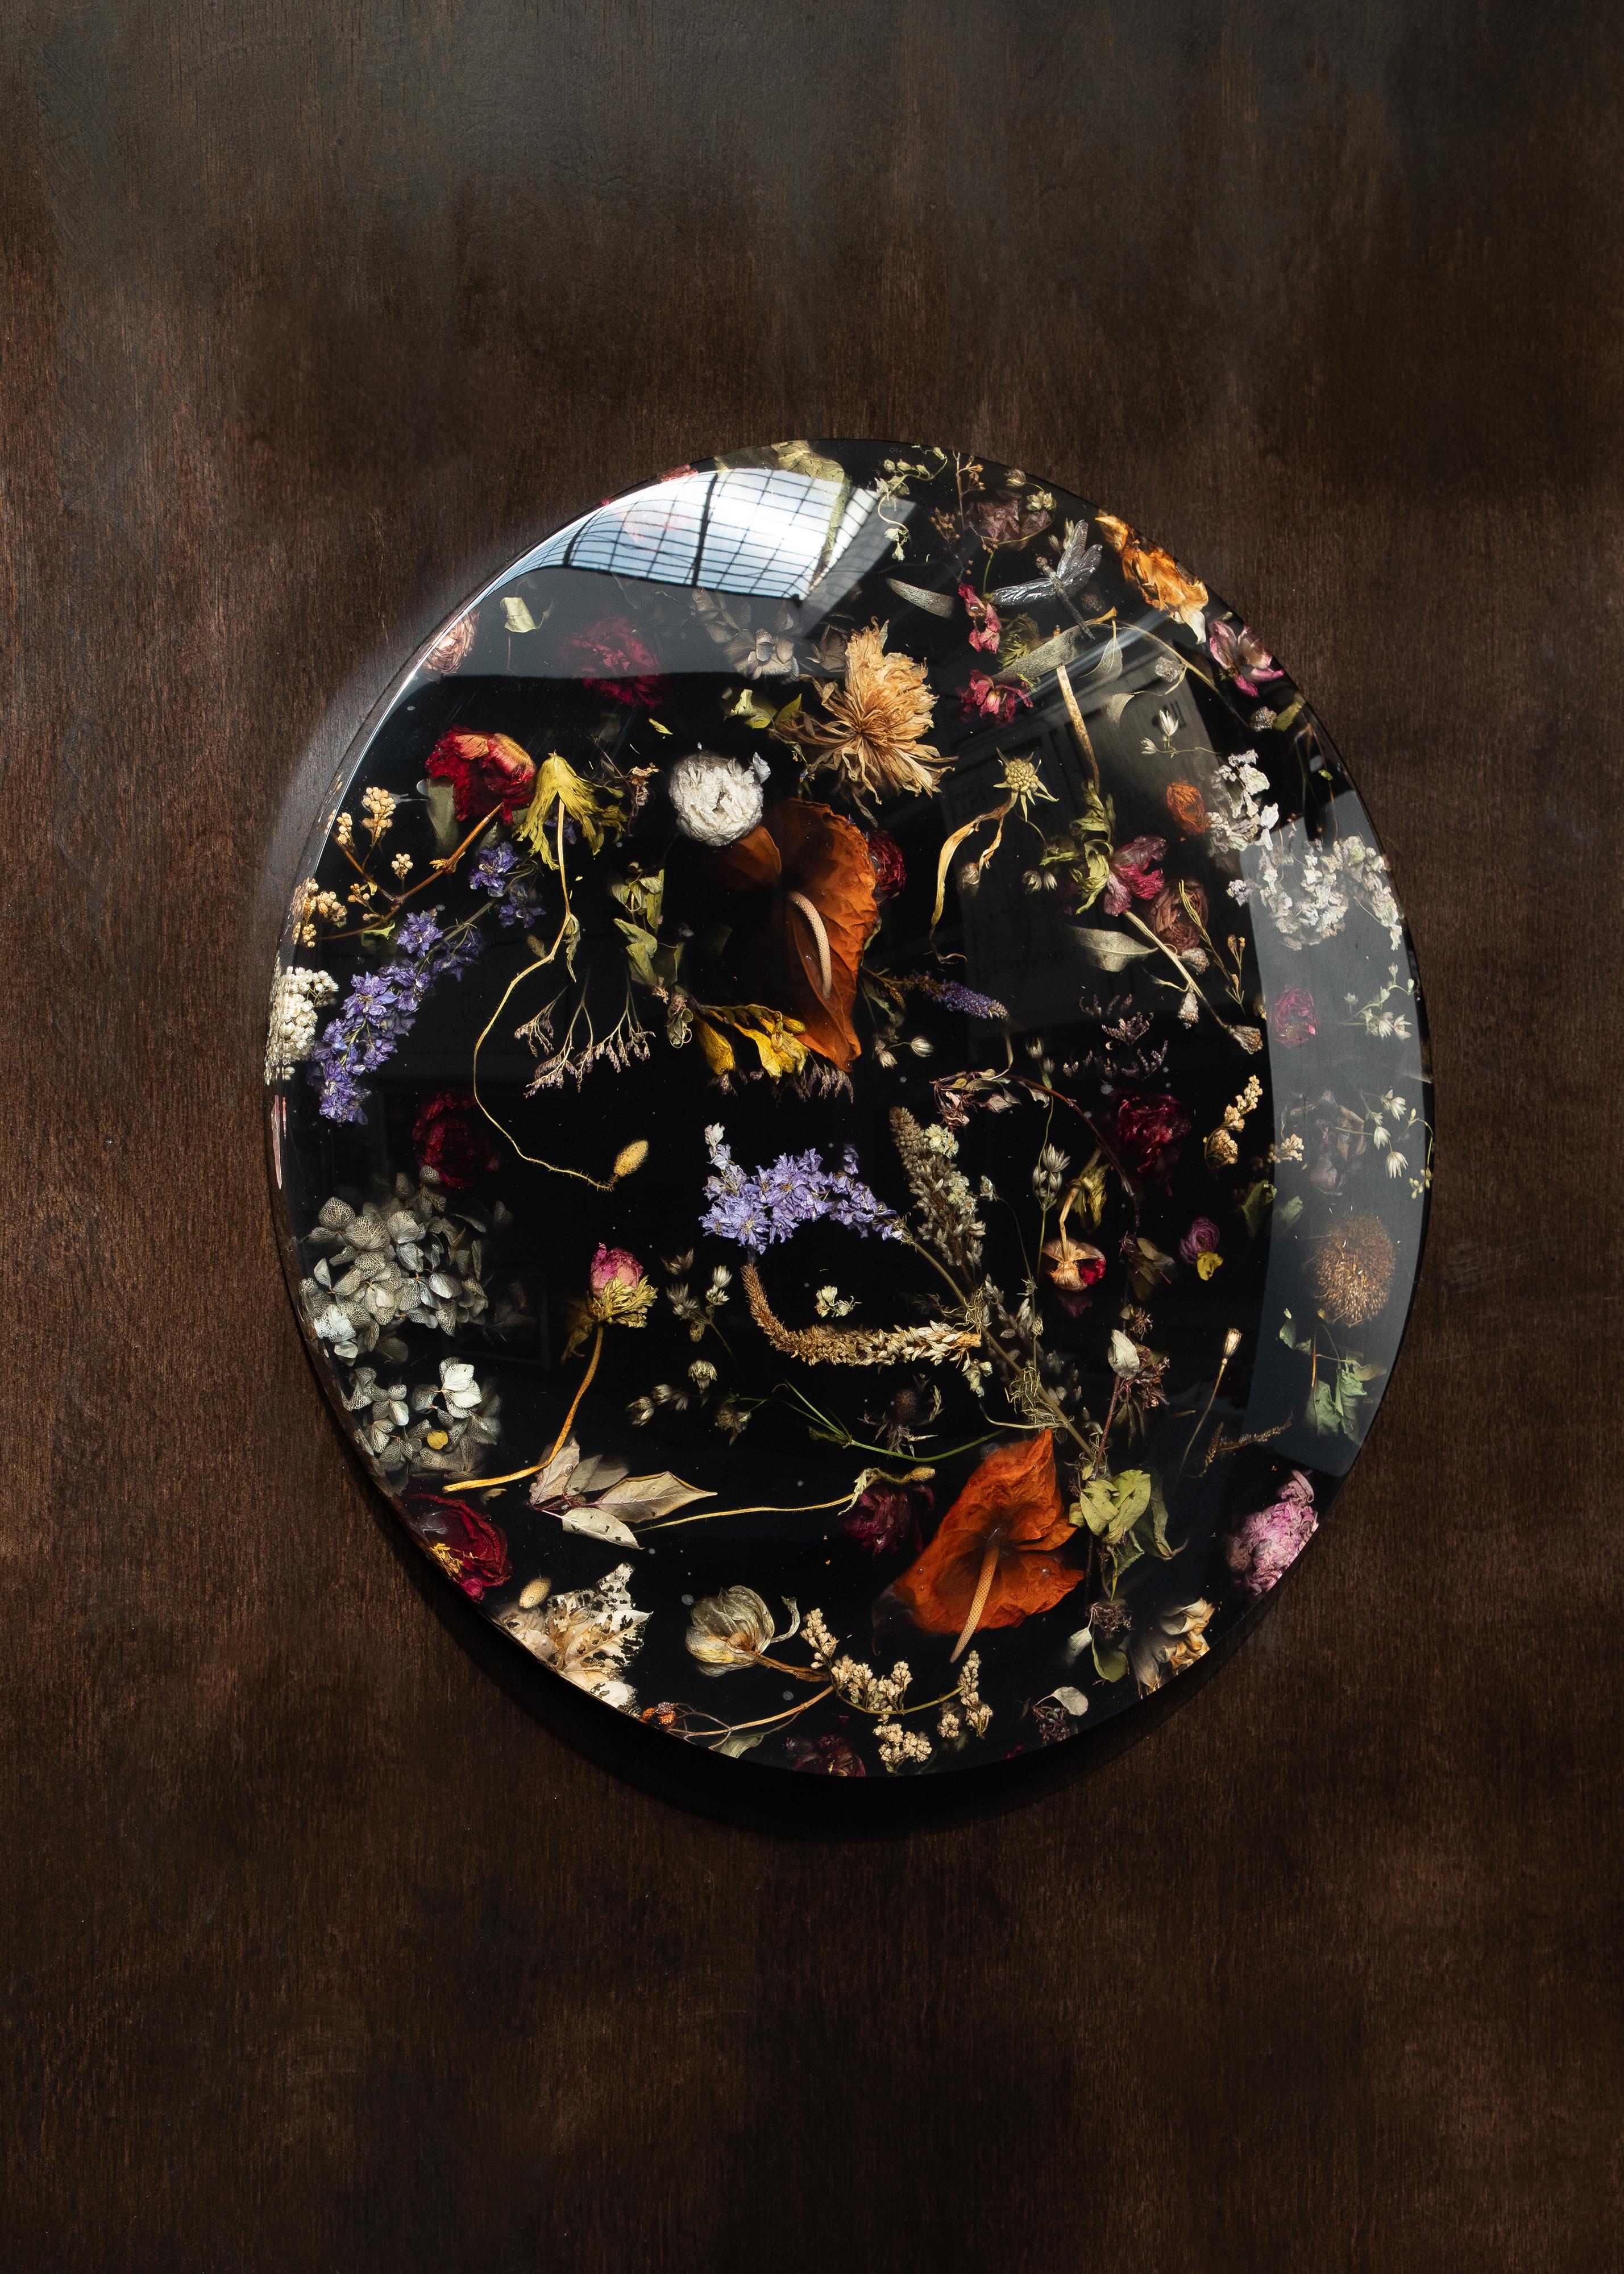 Part of Marcin Rusak’s signature Flora collection, the wall-hanging Flora Lens 65 constitutes a unique decorative piece that works well in a variety of settings. Based on discarded flowers carefully submerged in resin, this convex piece is entirely